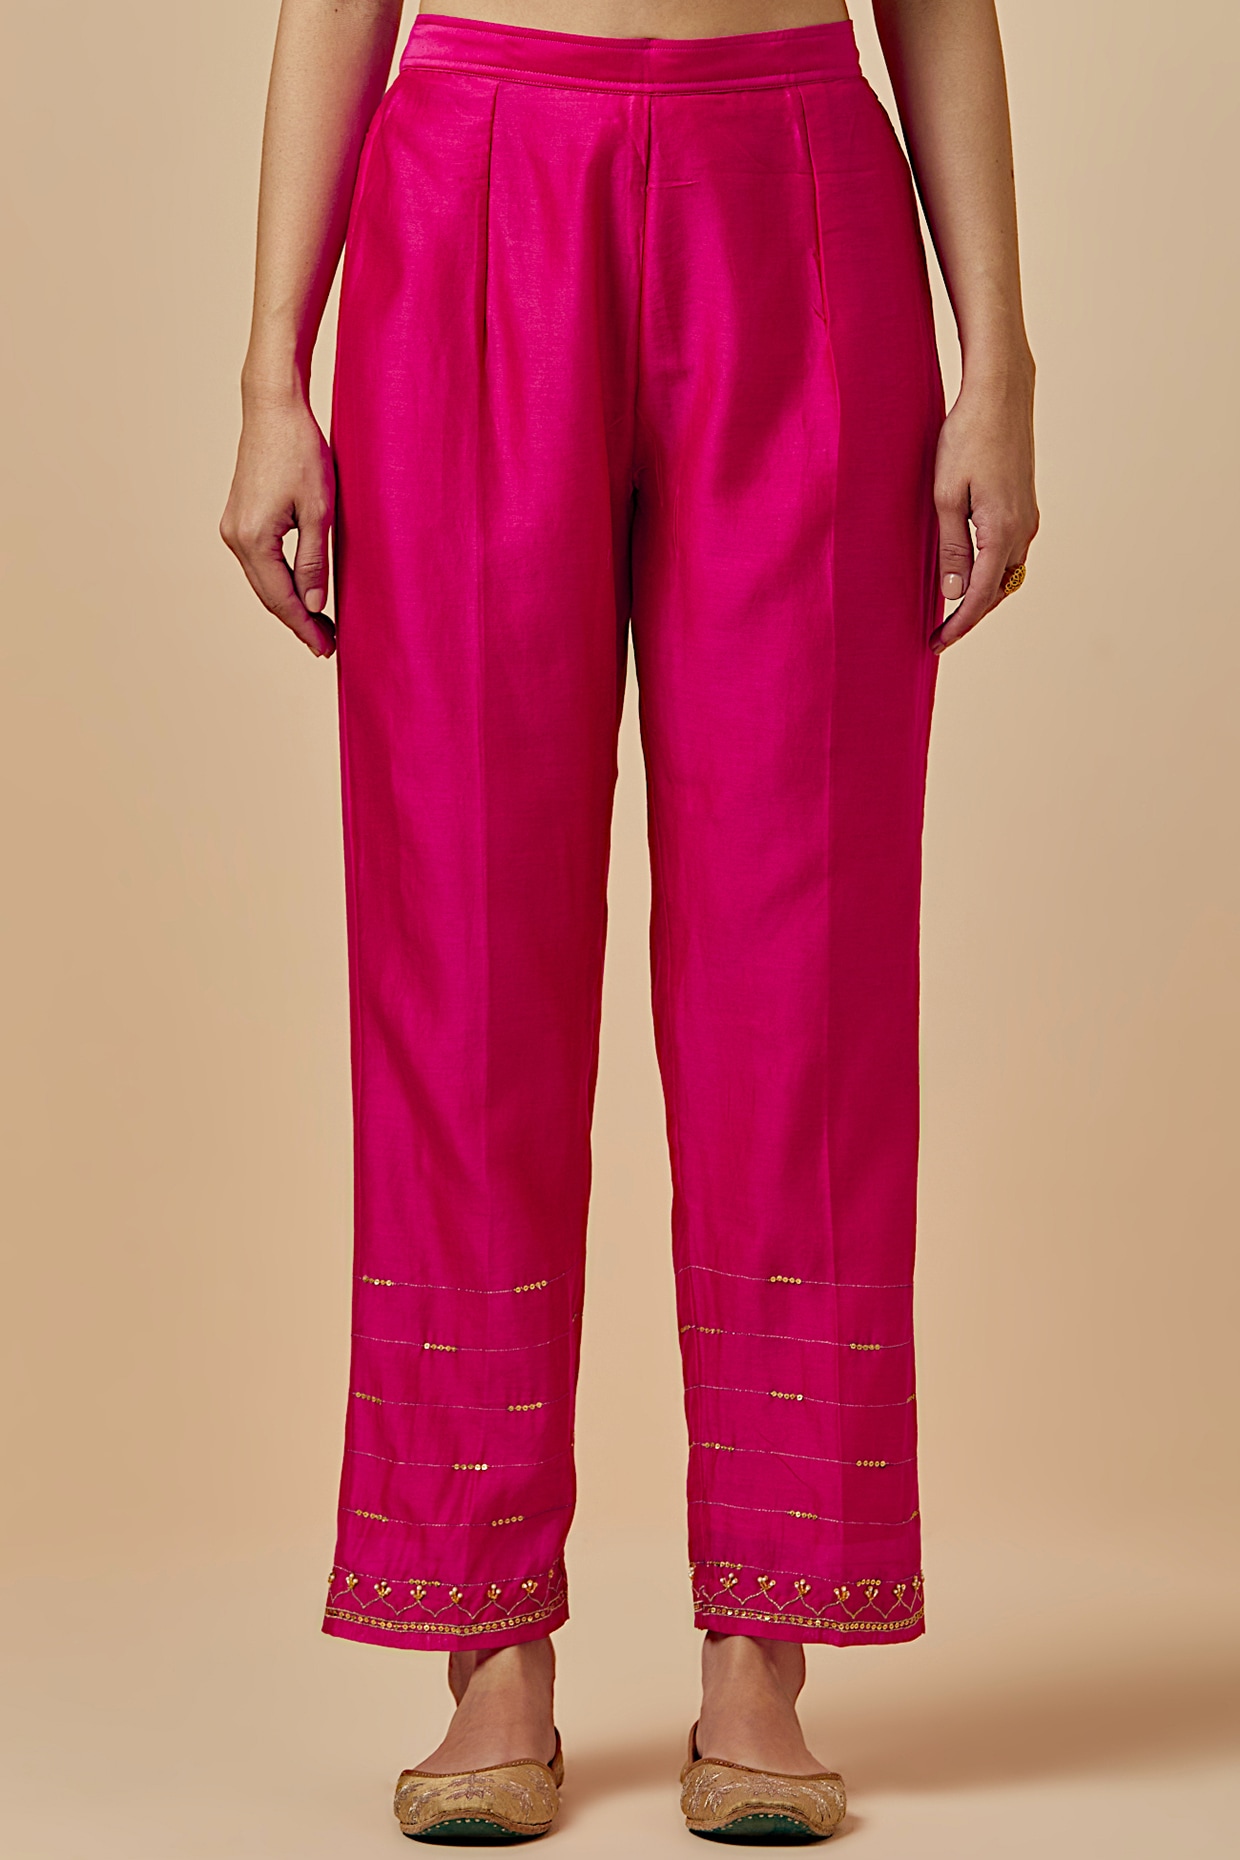 Palazzo Pants Design Trouser Fashion Guide APK per Android Download